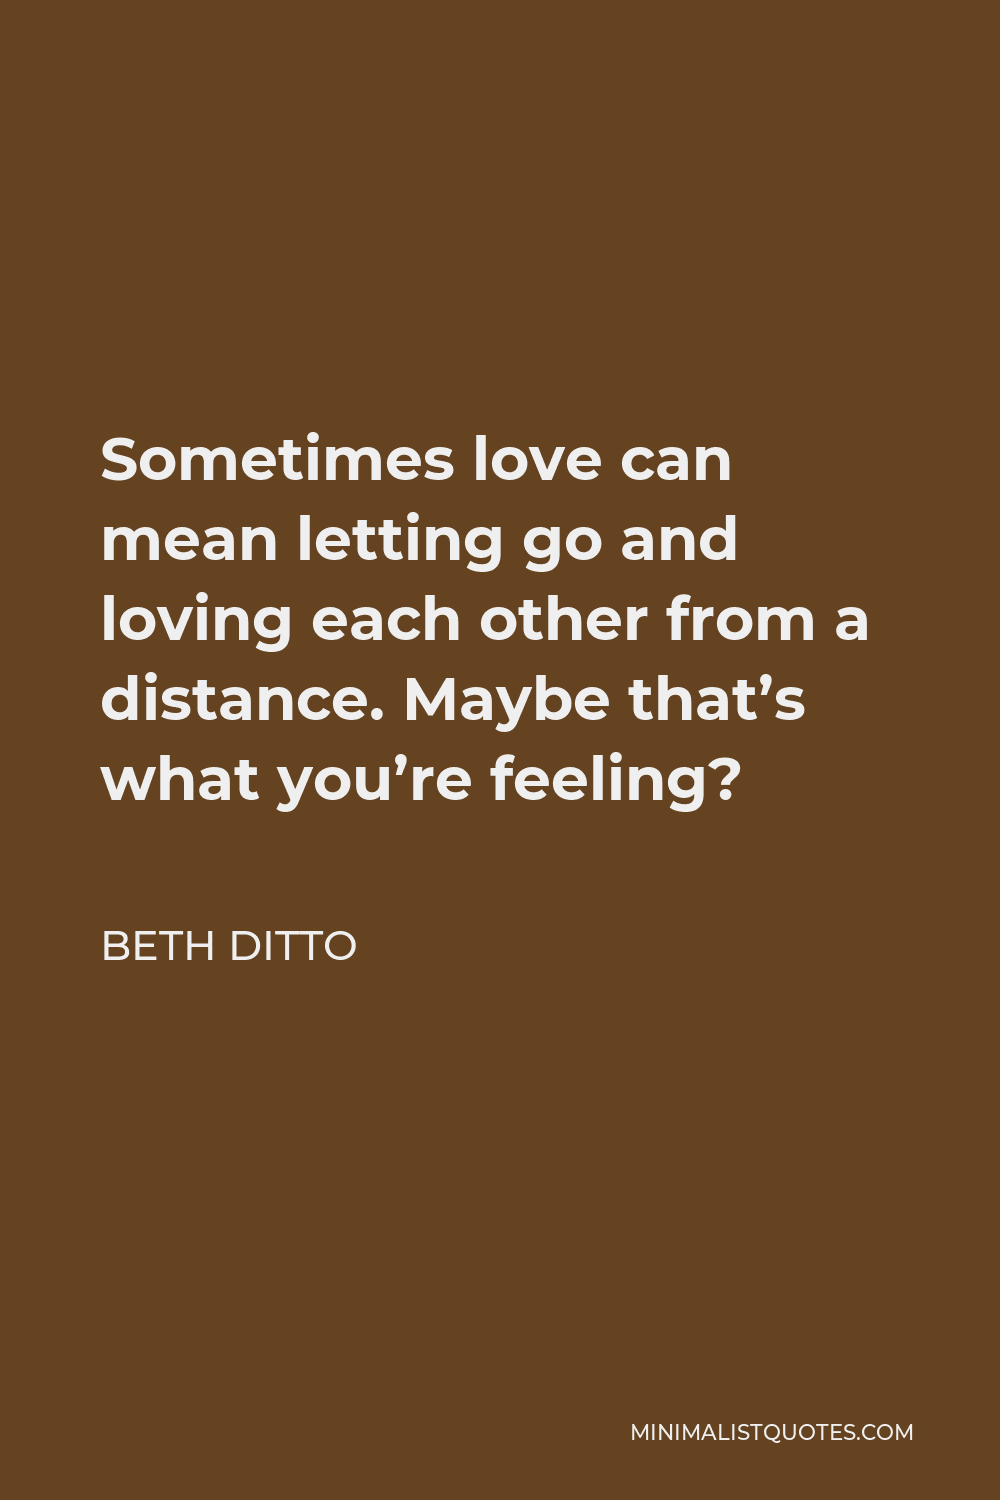 Beth Ditto Quote: Sometimes love can mean letting go and loving each other  from a distance. Maybe that's what you're feeling?